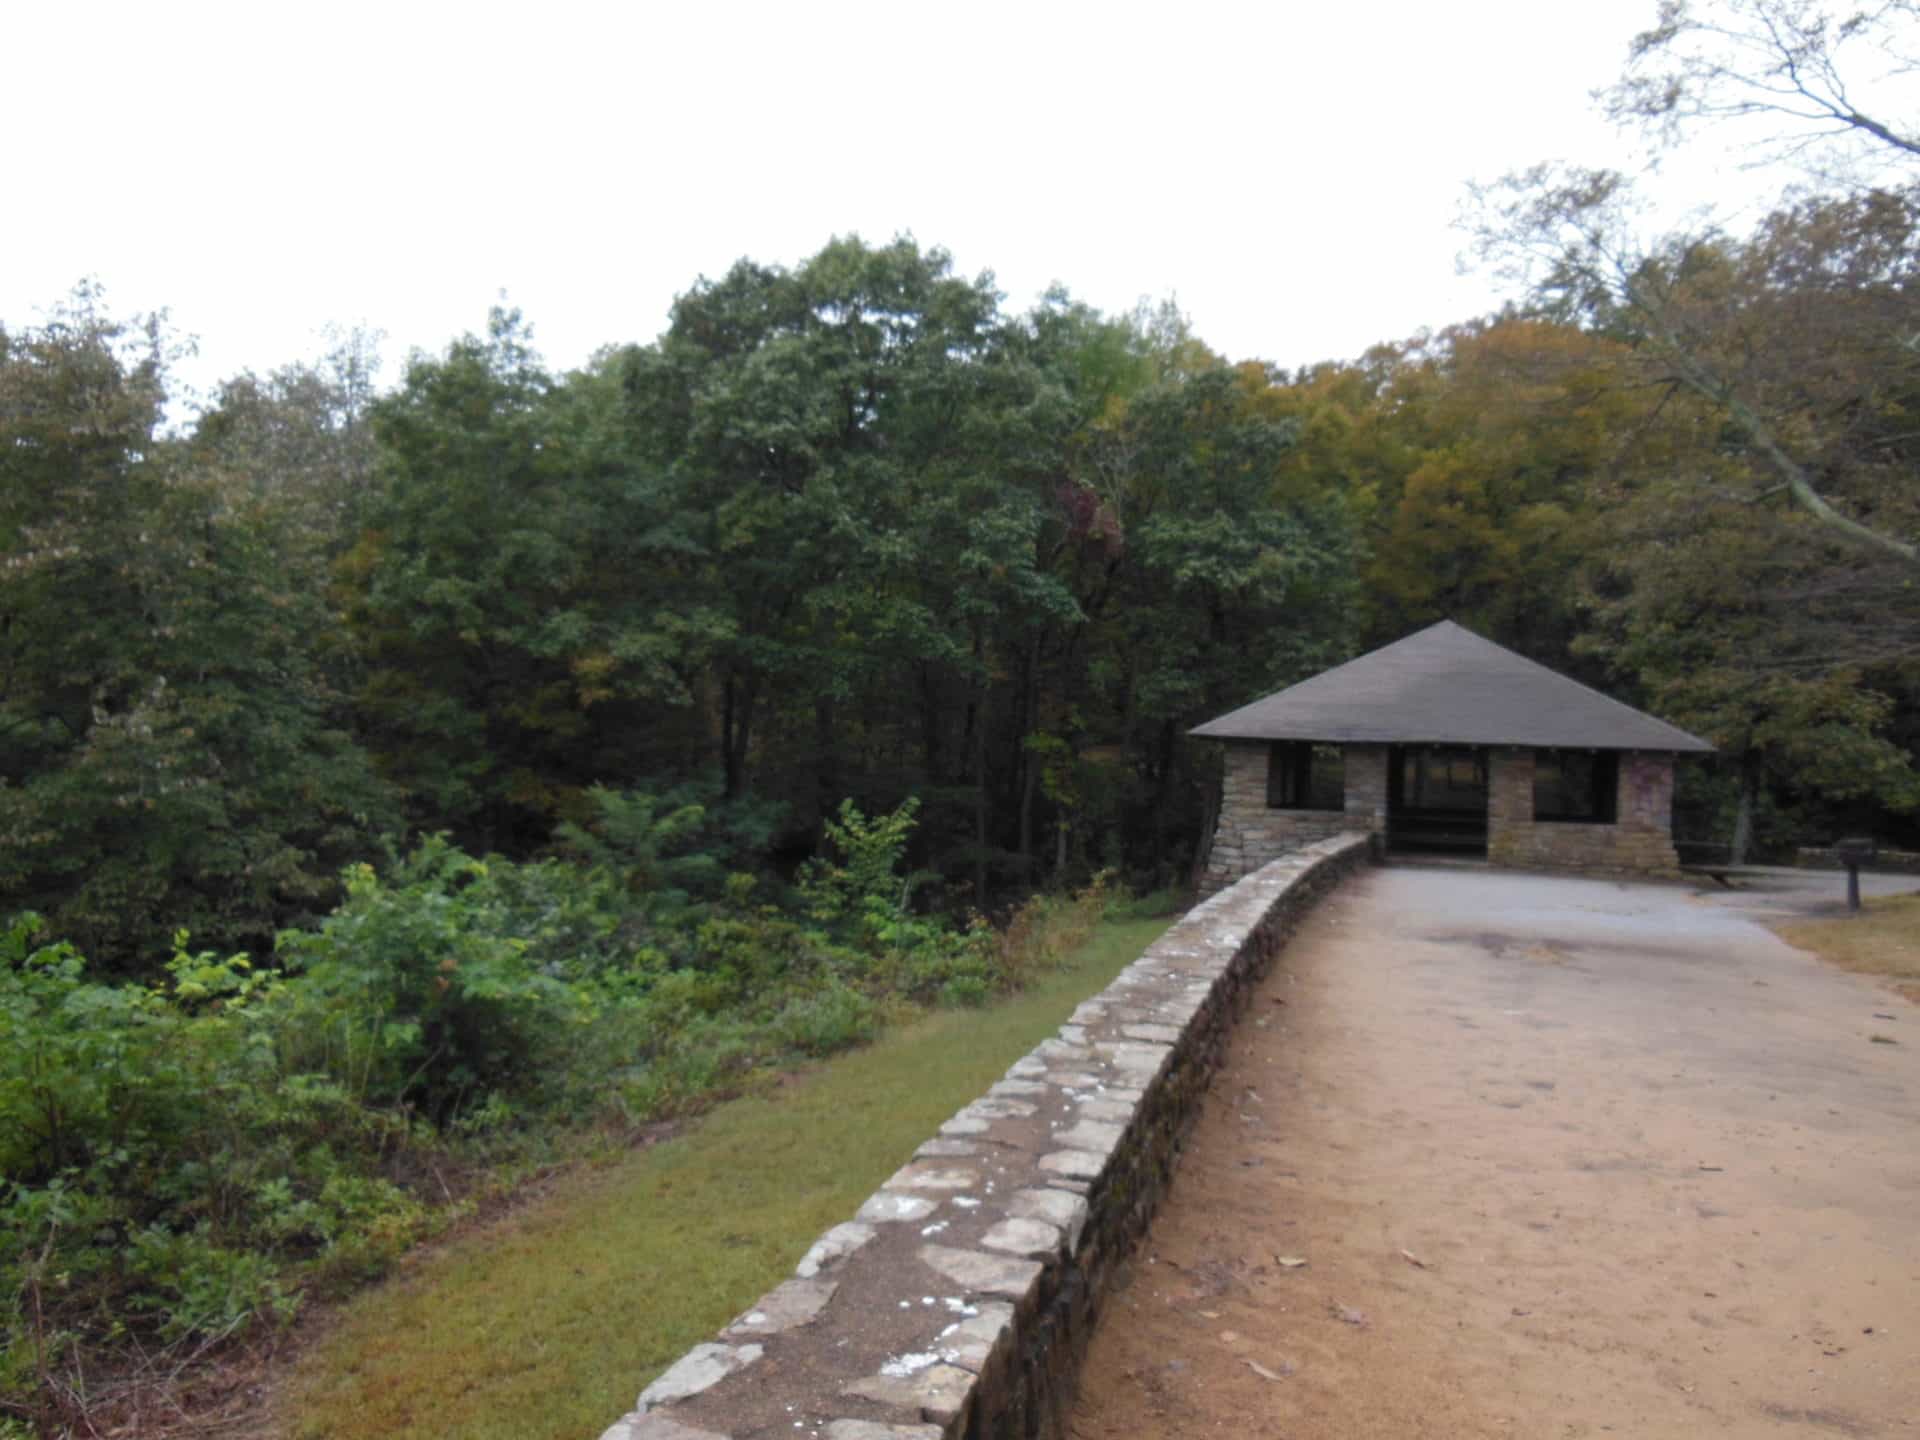 Monte Sano State Park - Stone Shelter from a distance